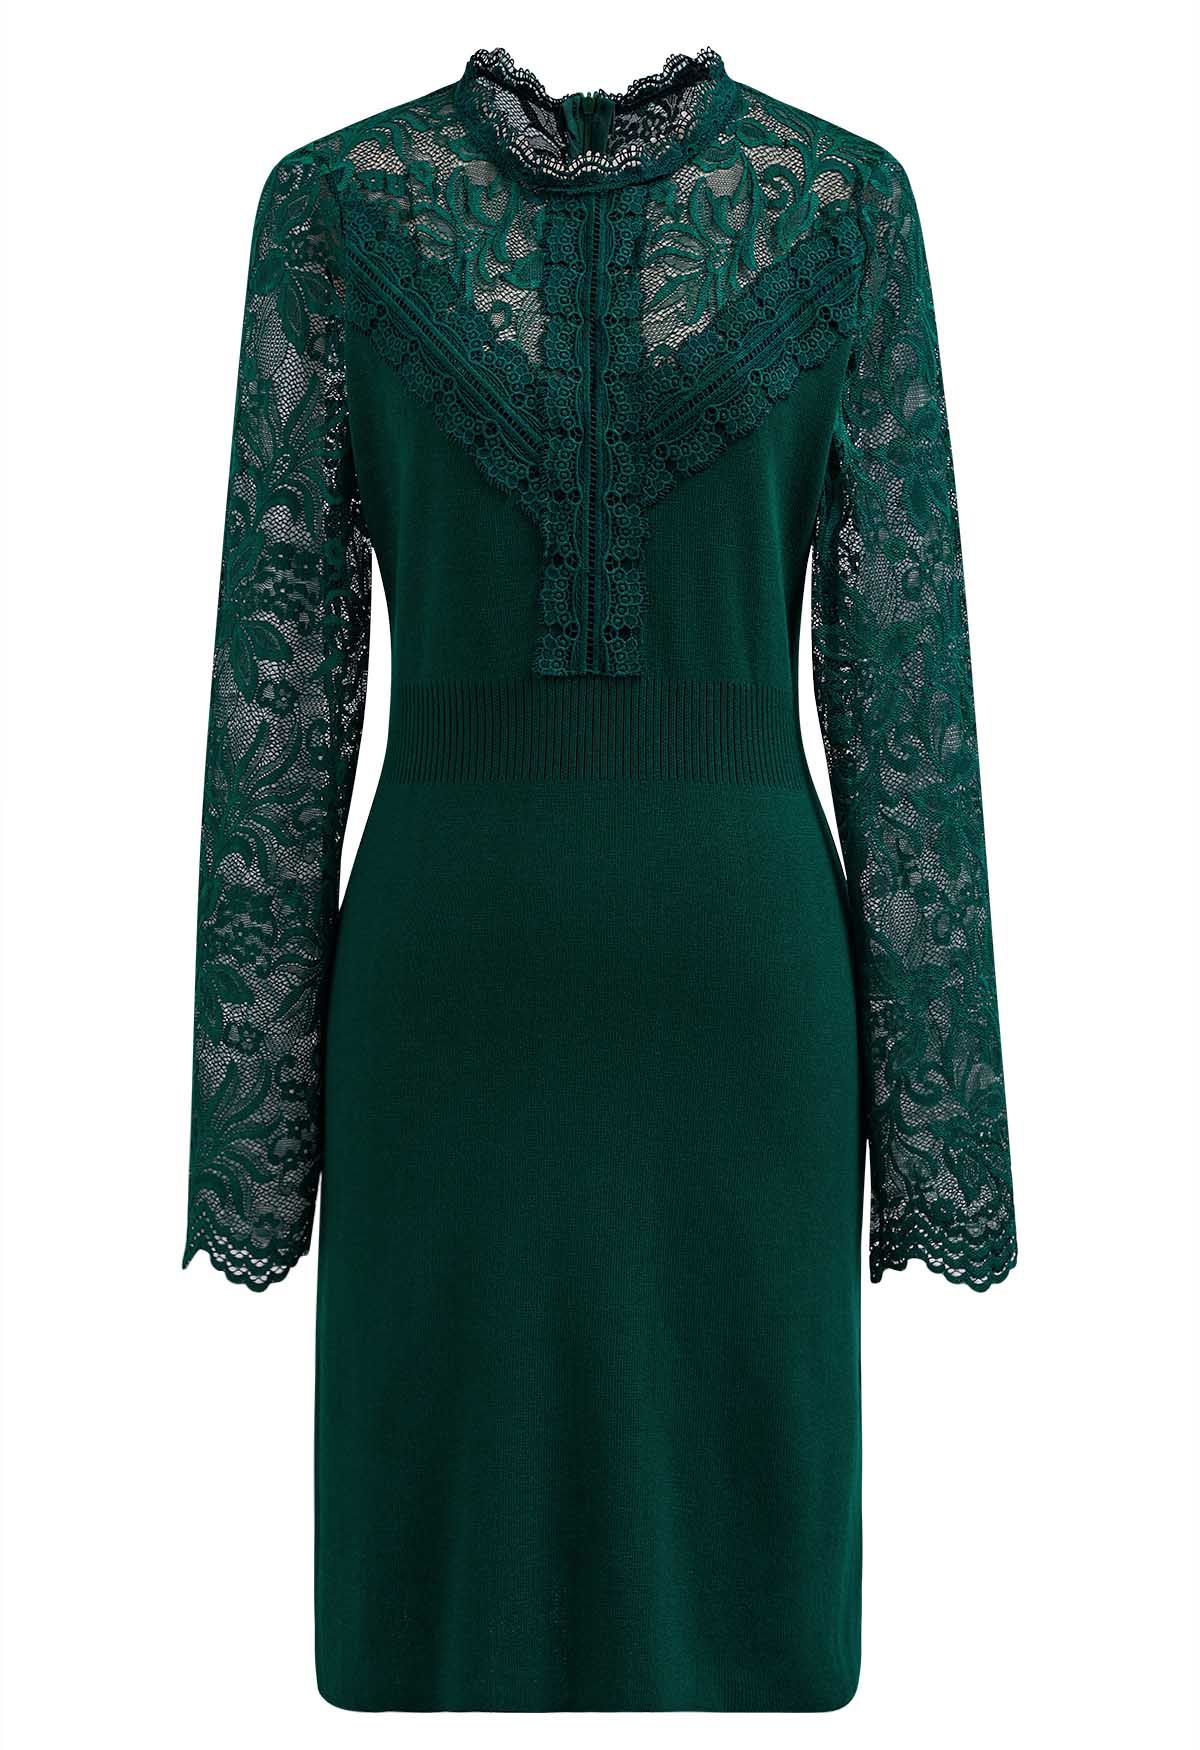 Floral Lace Spliced Knit Dress in Dark Green - Retro, Indie and Unique  Fashion